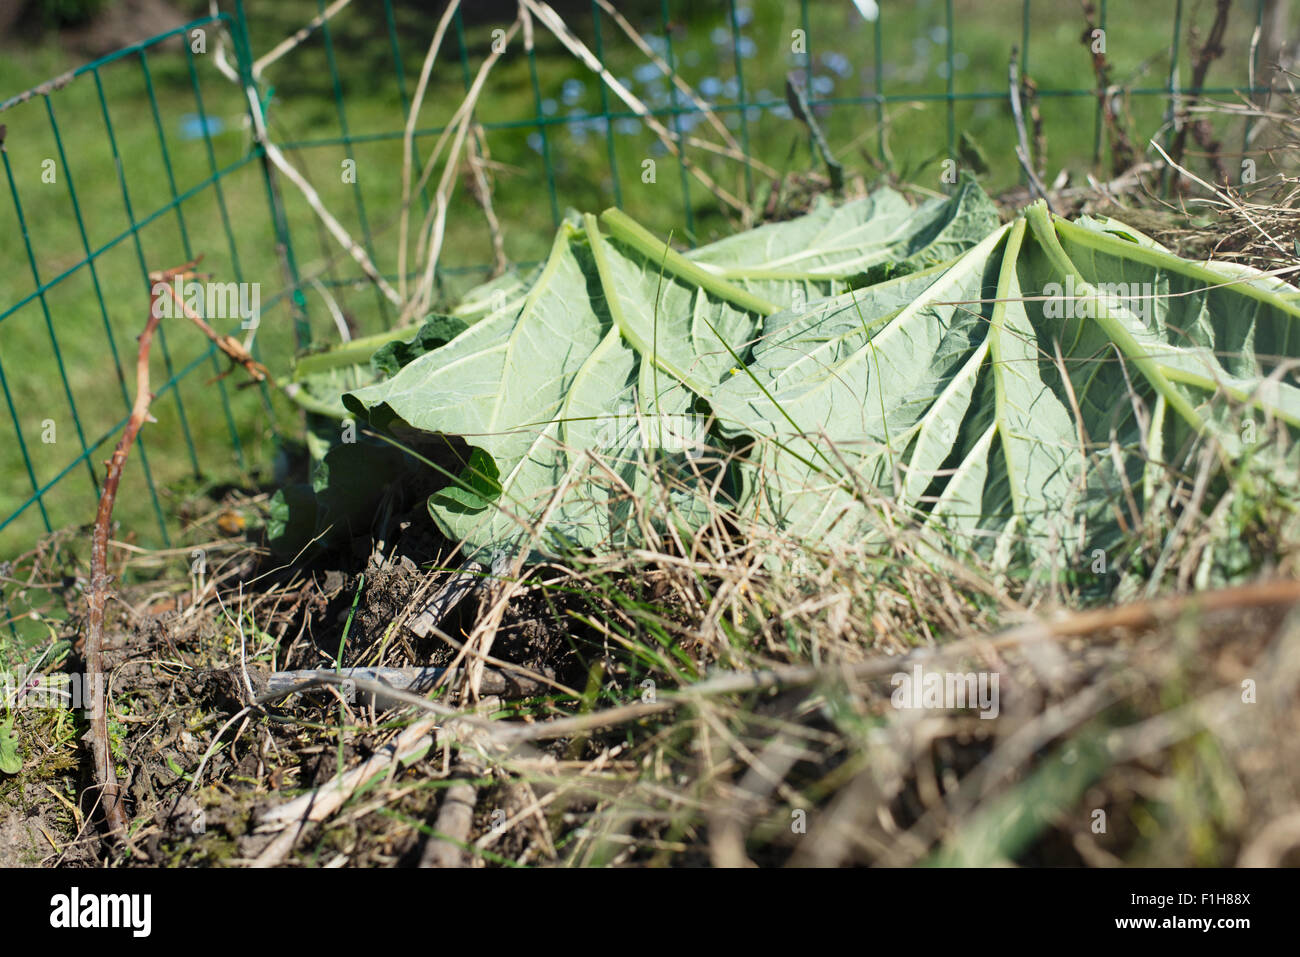 Close up of compost bin in garden filled with plant waste Stock Photo